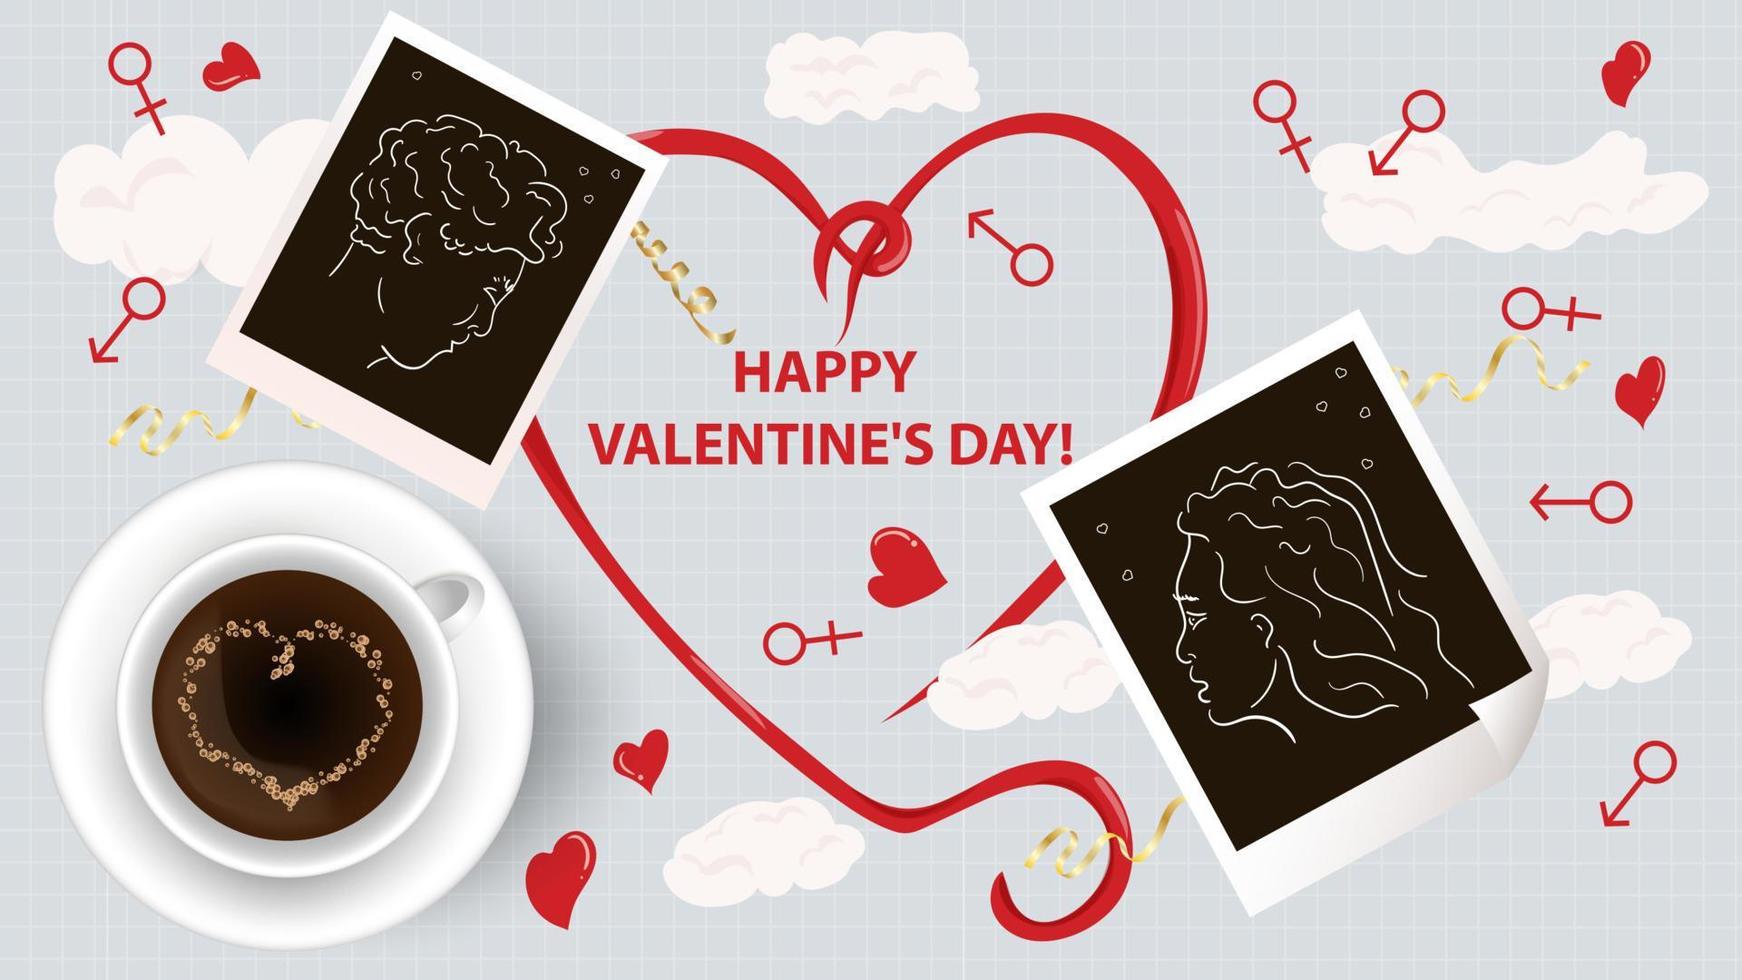 Illustration in a flat style for the Valentines Day holiday two photos and in the middle a heart with curls next to a cup on a saucer background a notebook sheet in a cage vector